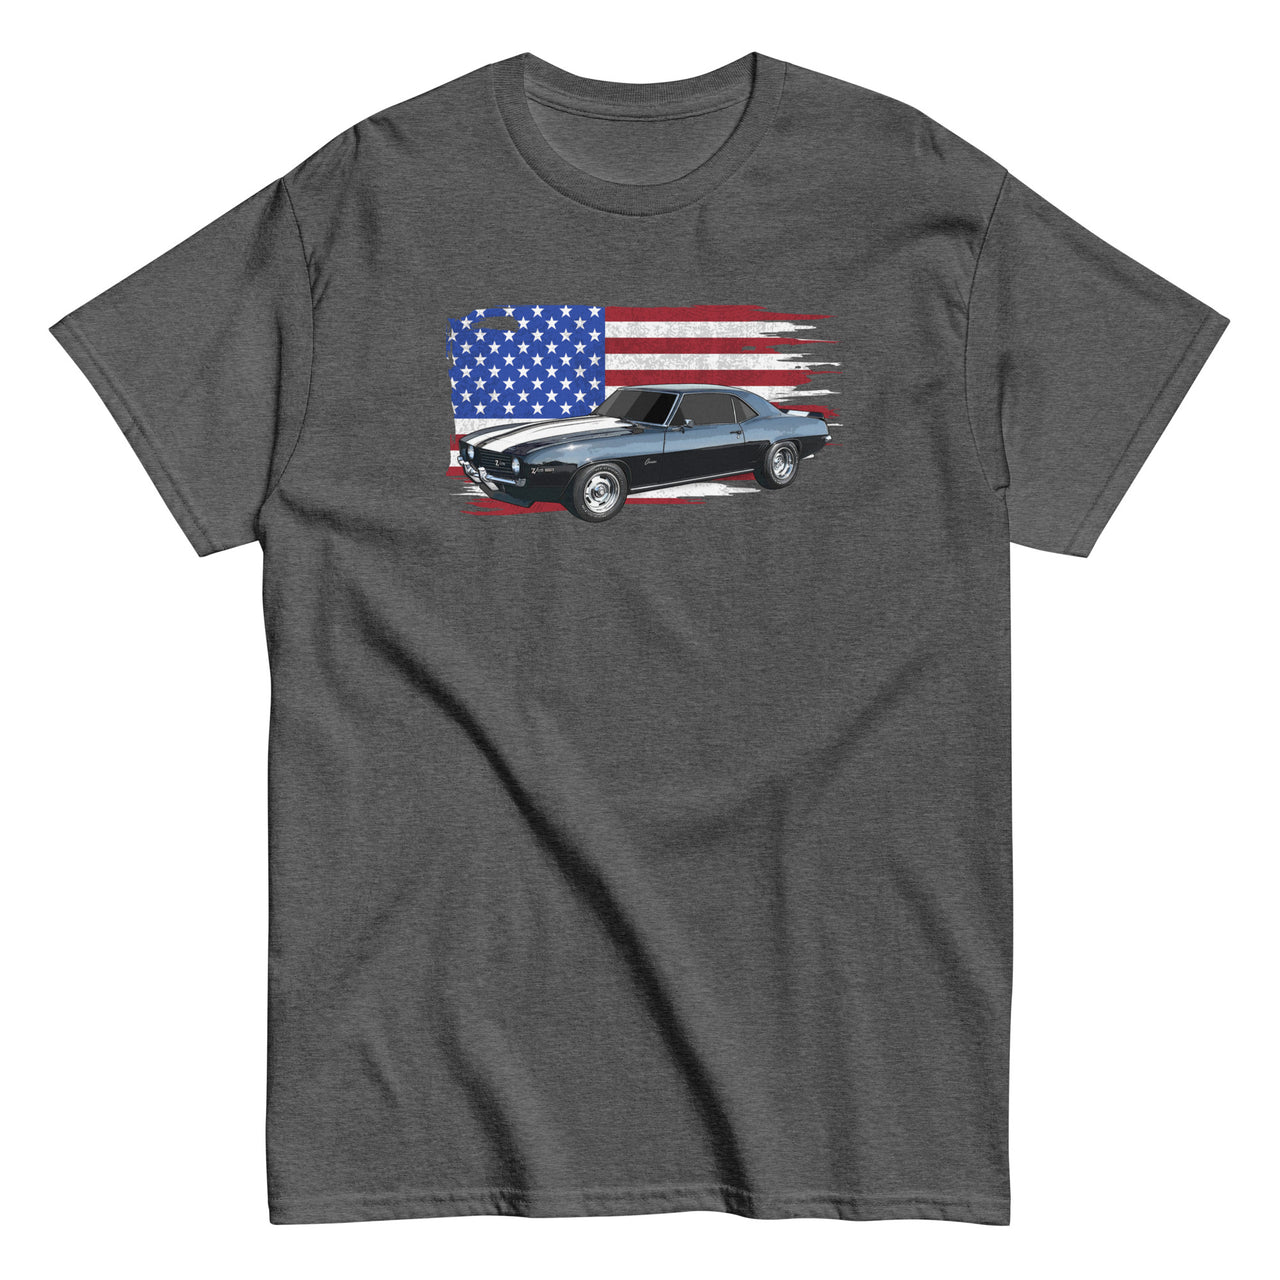 69 Camaro T-Shirt With American Flag Background - grey